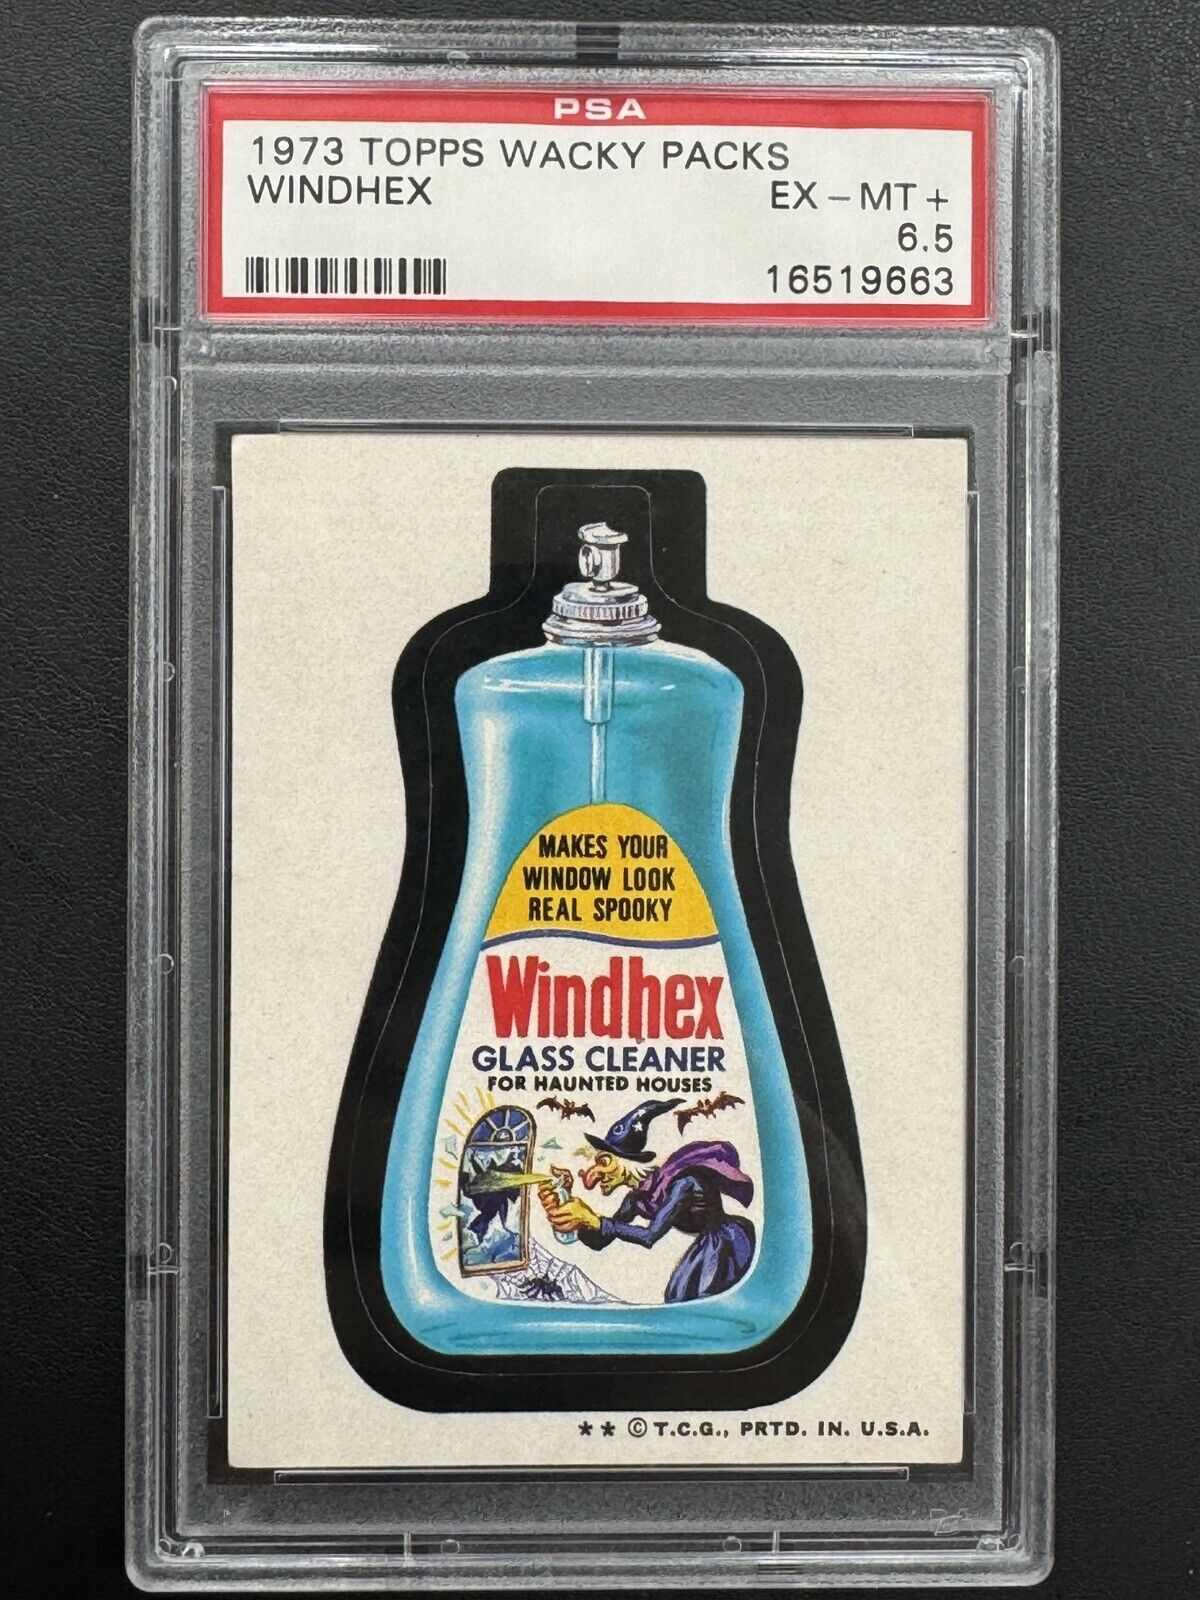 1973 Topps Wacky Packages, Series 4 WINDHEX, PSA 6.5 EX-MT+